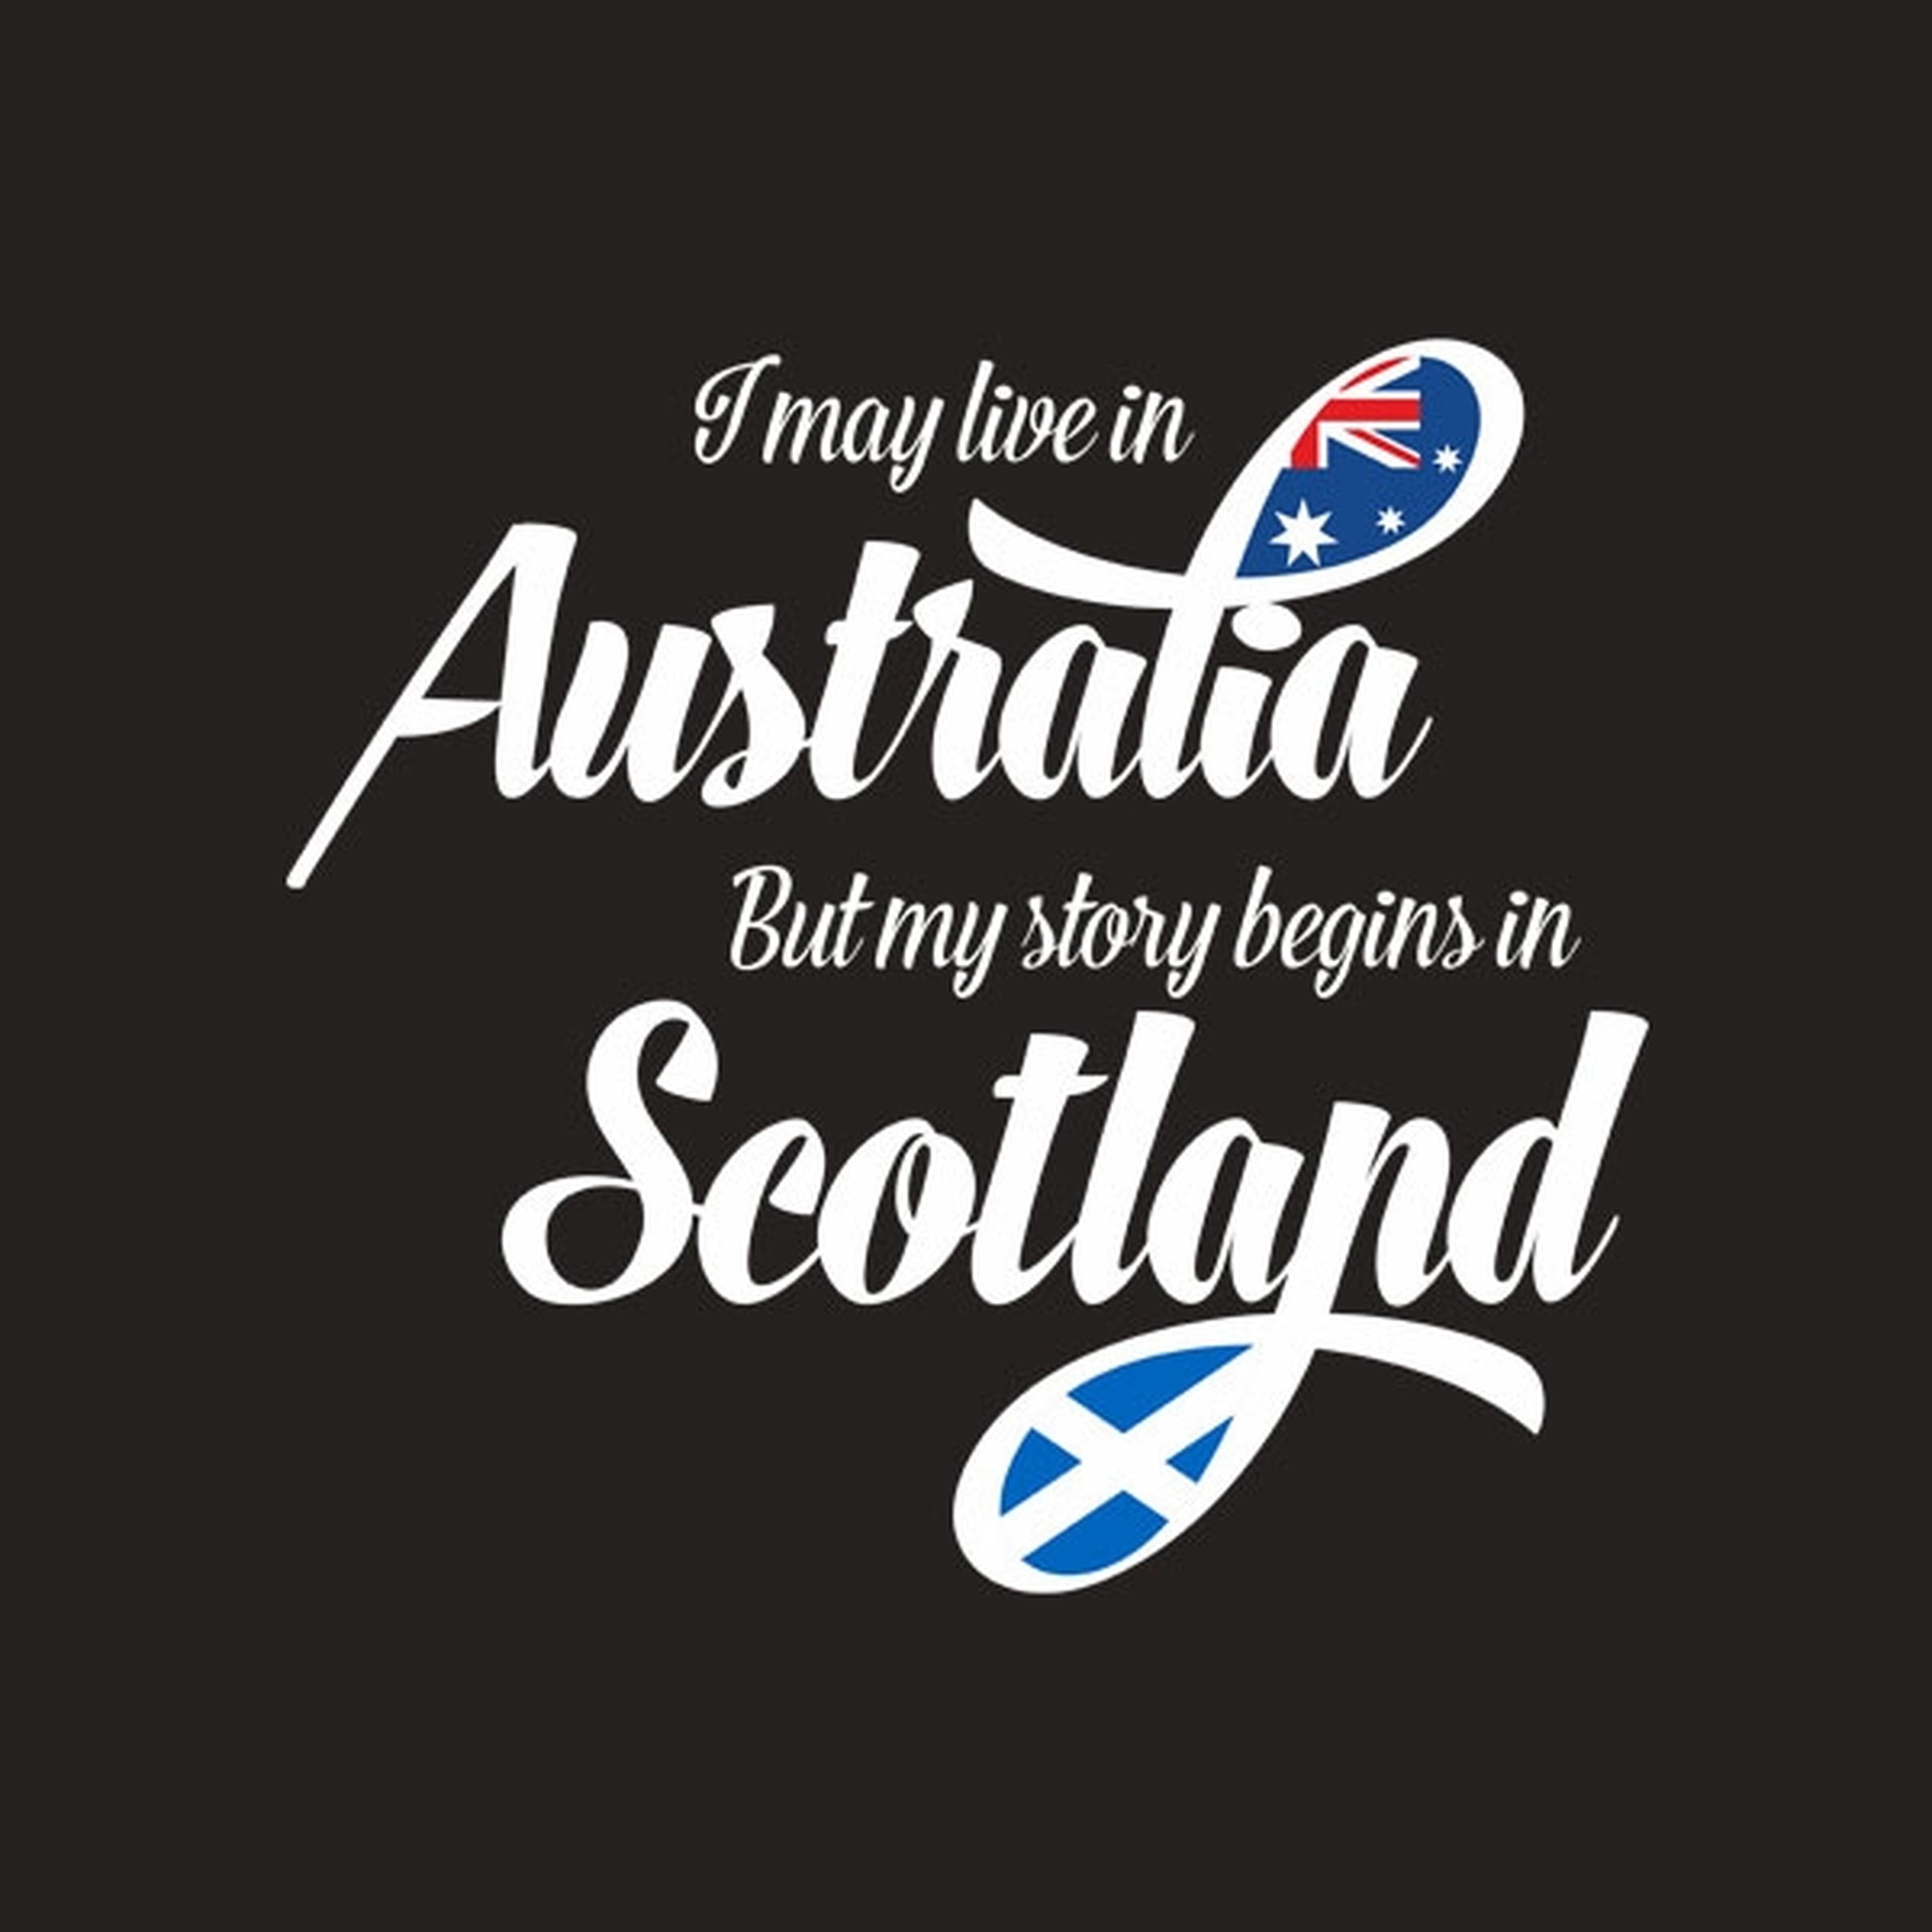 I may live in Australia but my story begins in Scotland